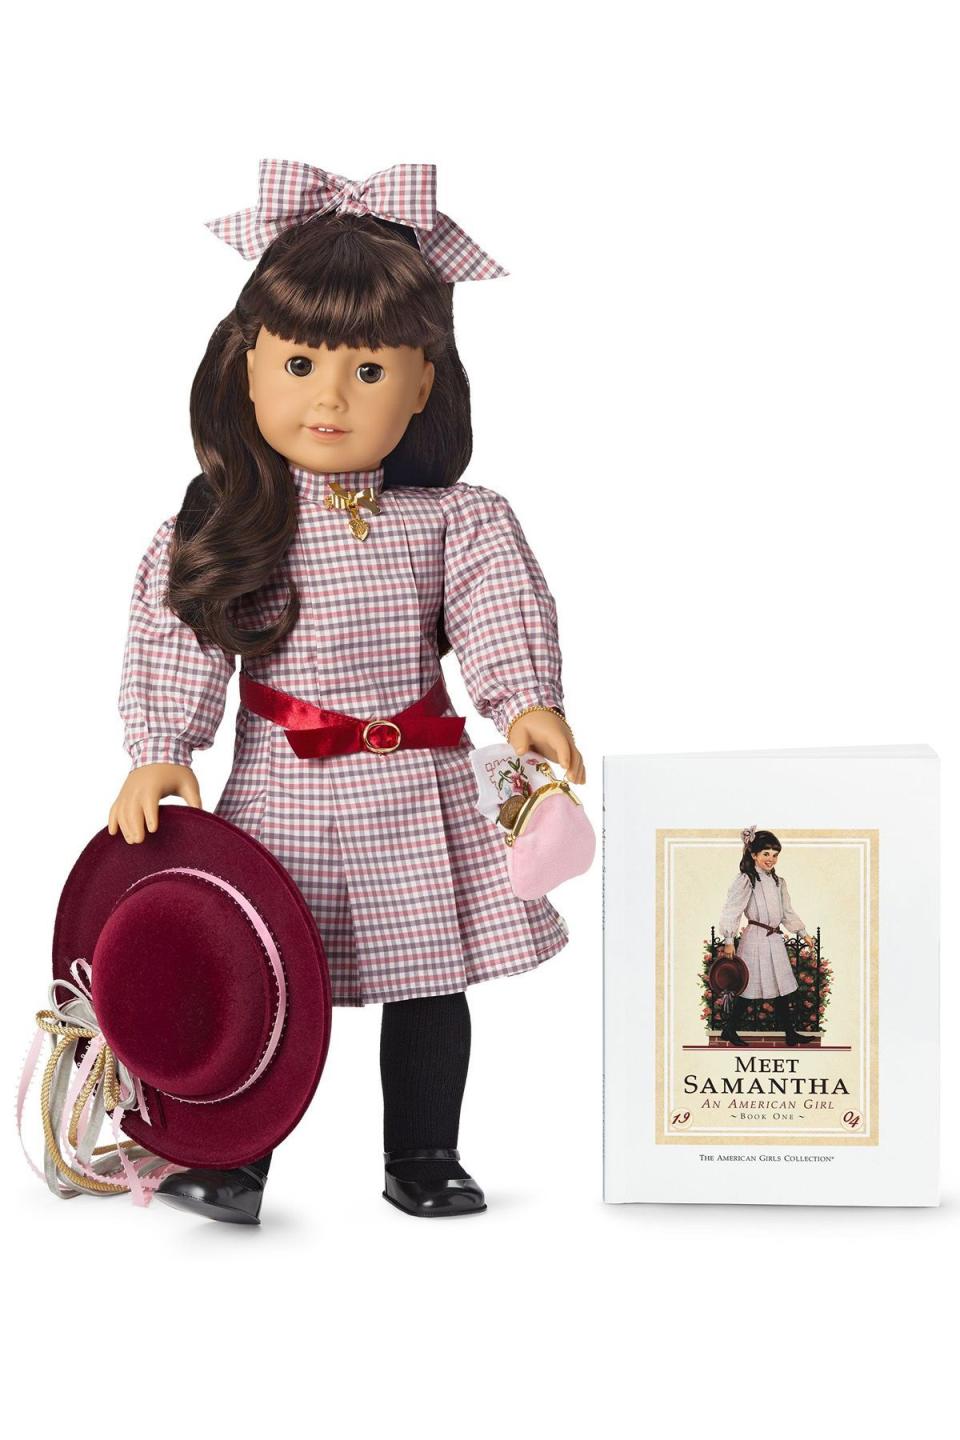 29) The vault was opened for American Girl's 35th anniversary.